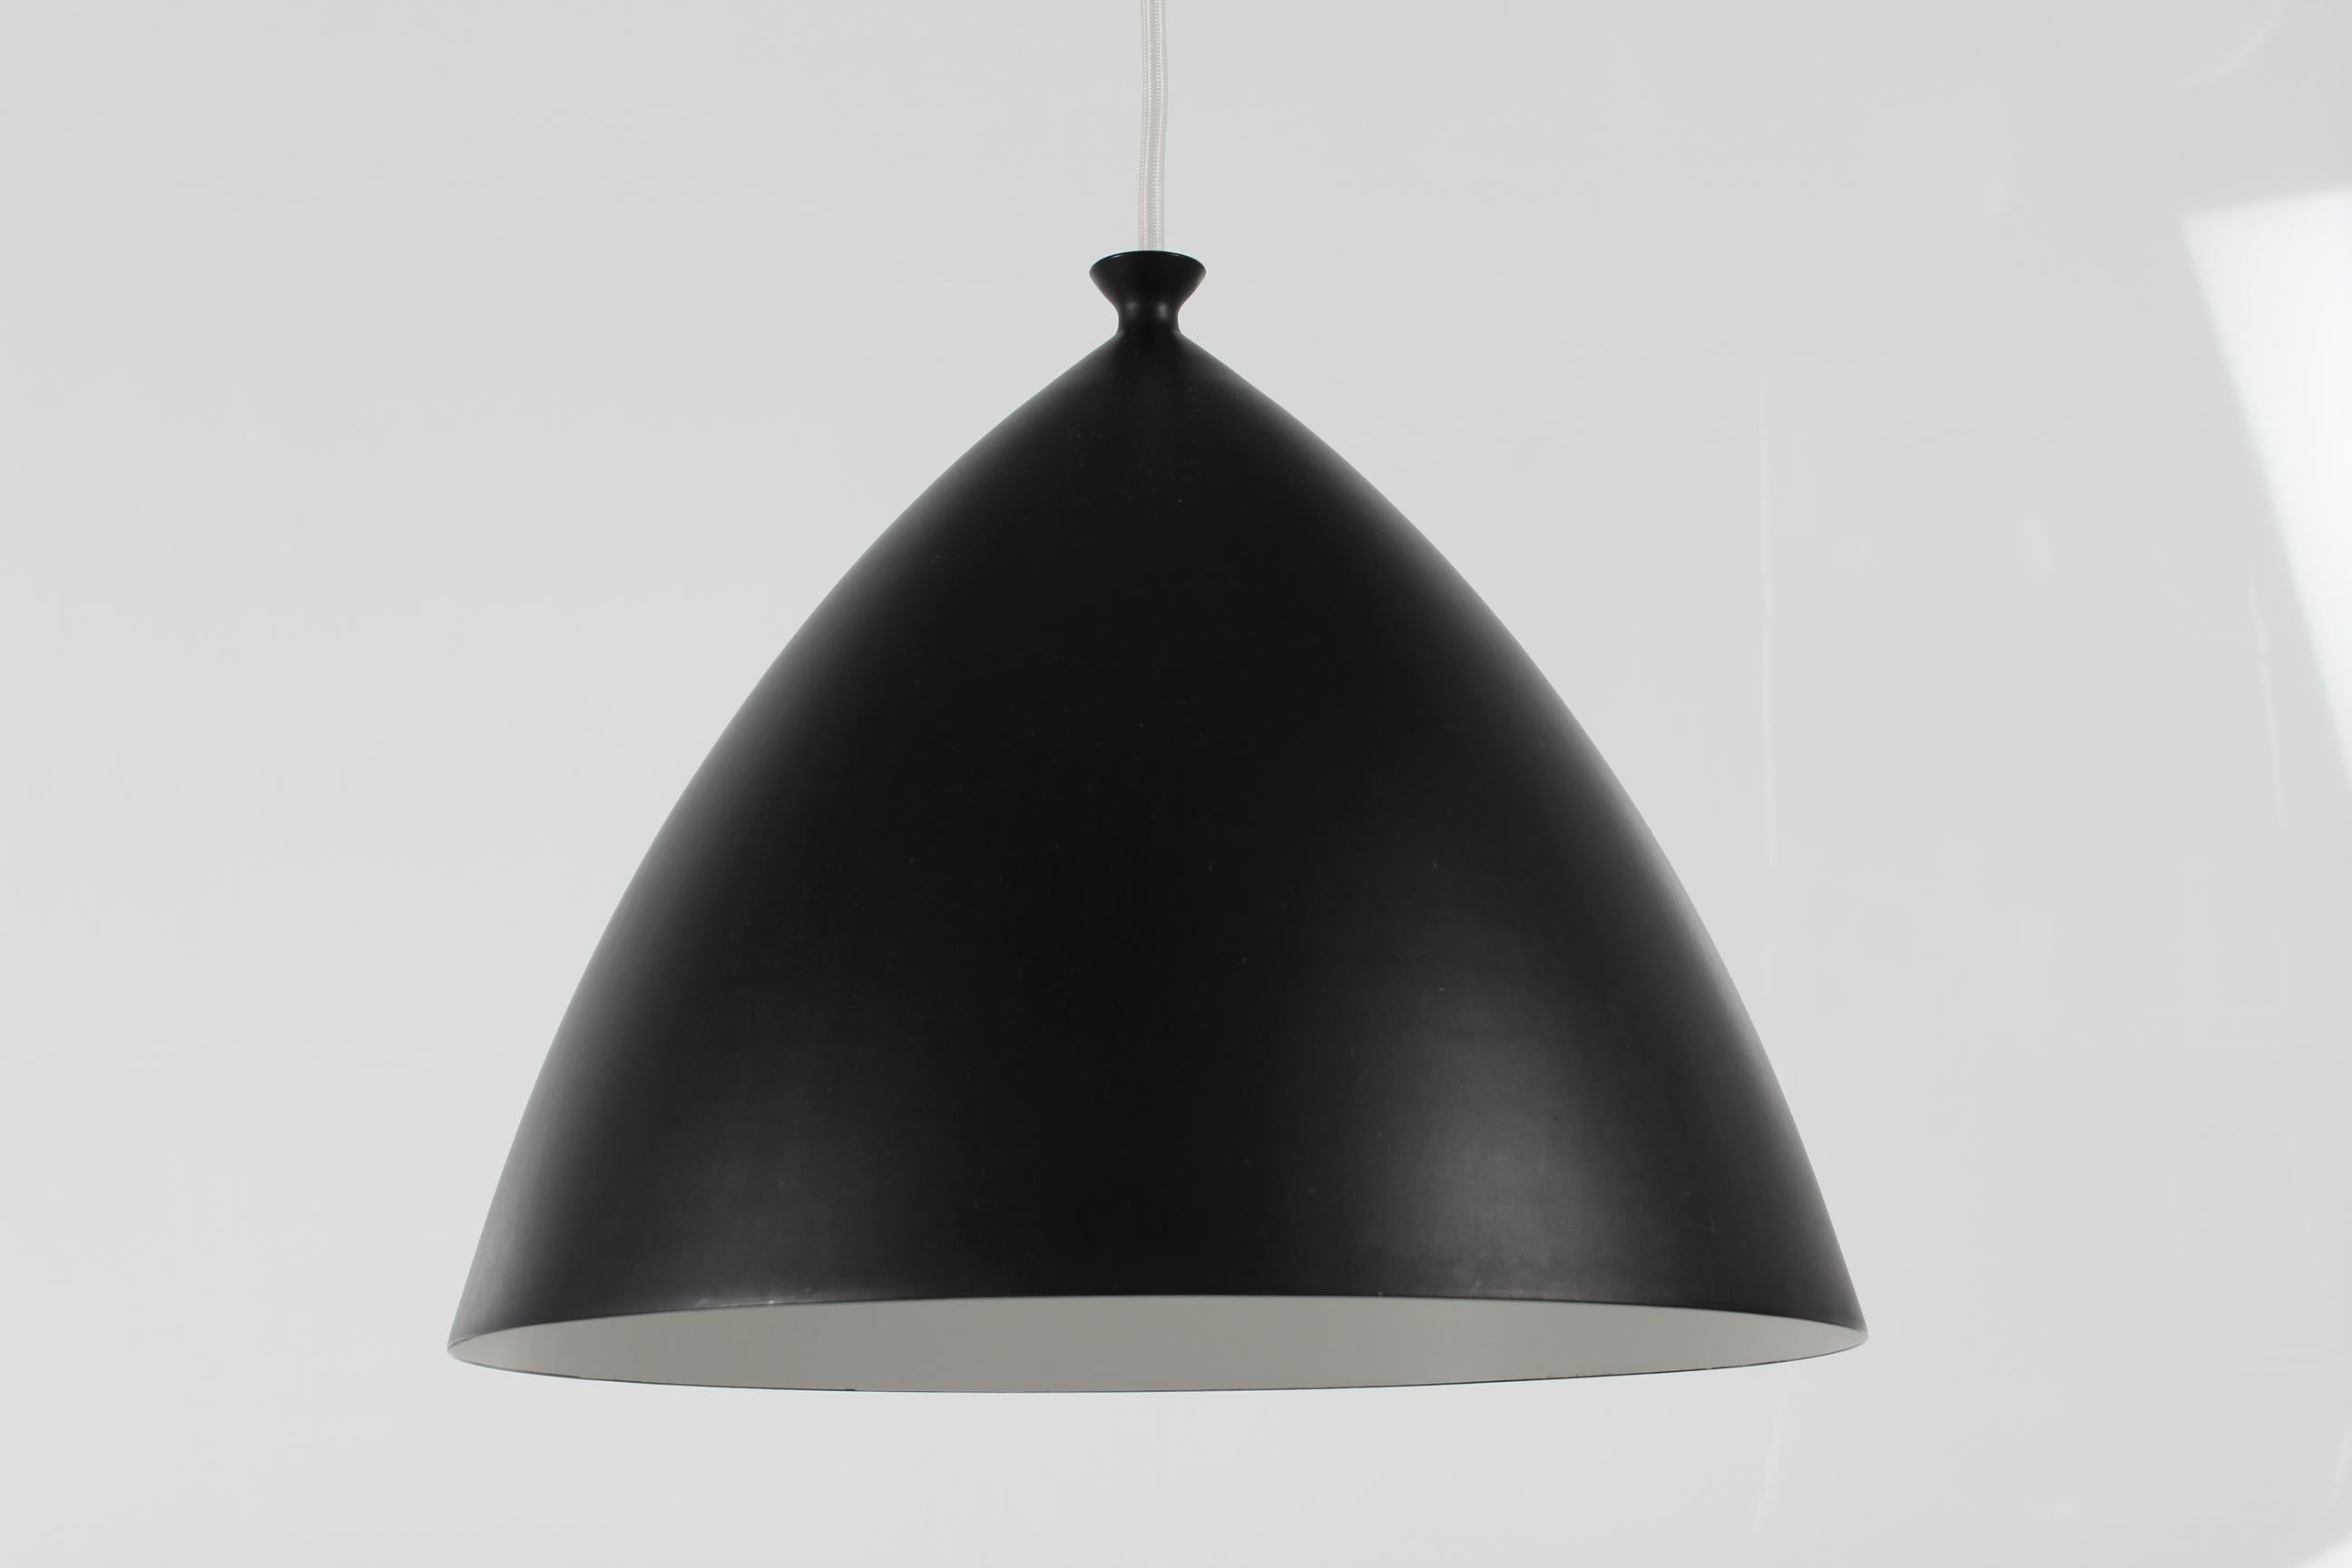 Vintage Scandinavian pendant manufactured ca 1960s.

The lamp is shaped like a beautiful taut arc with a nice detailing on top like an open mouth. It's black on the outside and white on the inside. Perfect over a dining table.

The designer and